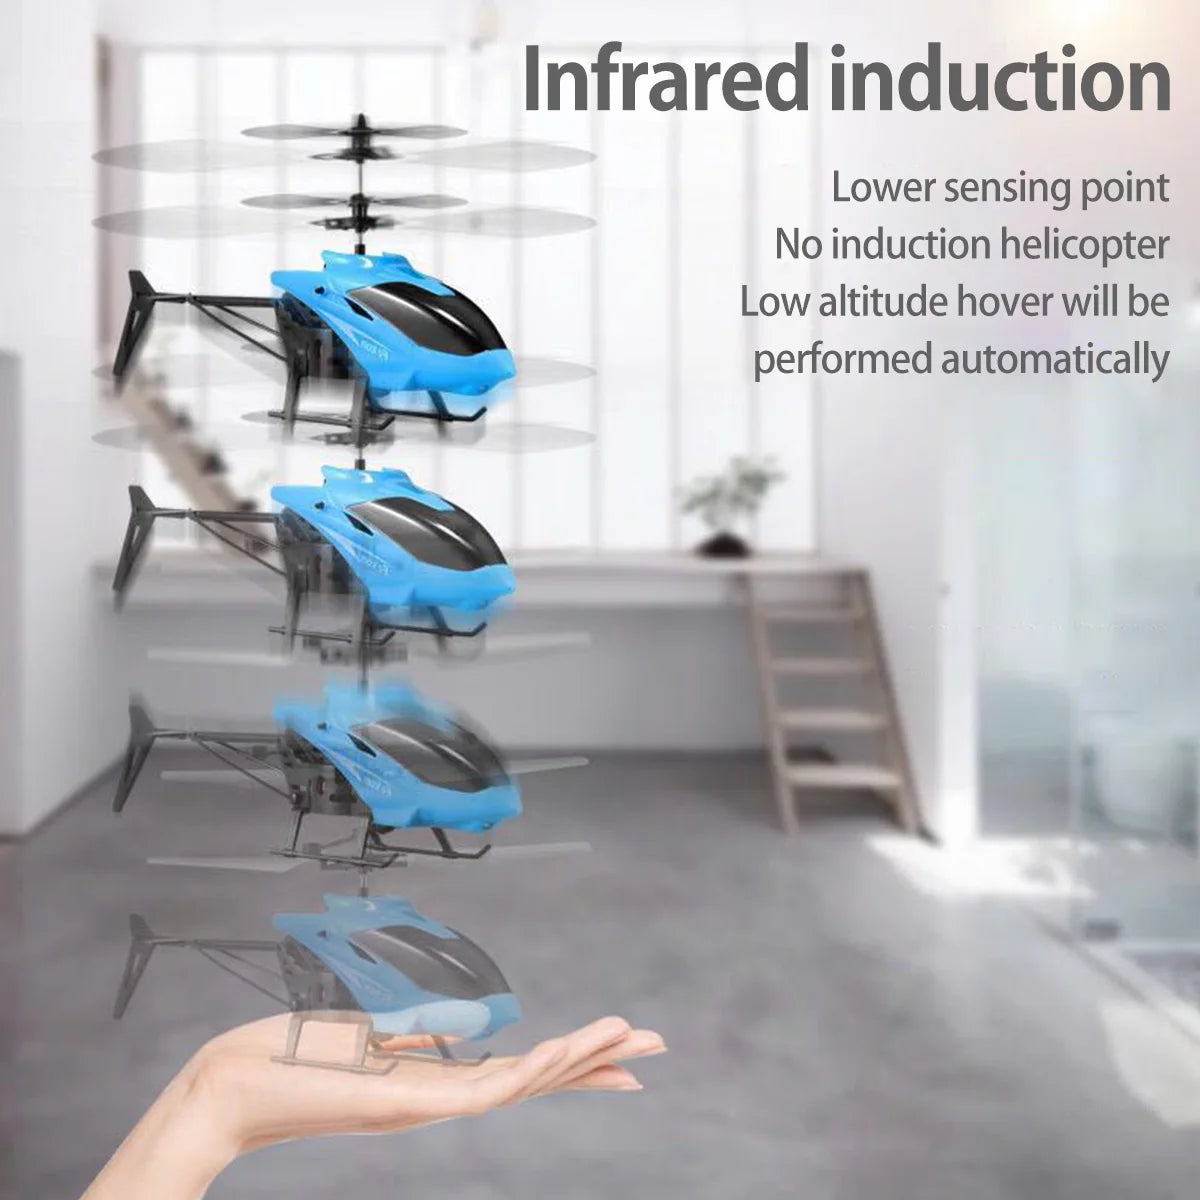 CY-38 Rc Helicopter, Infrared induction No induction helicopter Low altitude hover will be performed automatically 1